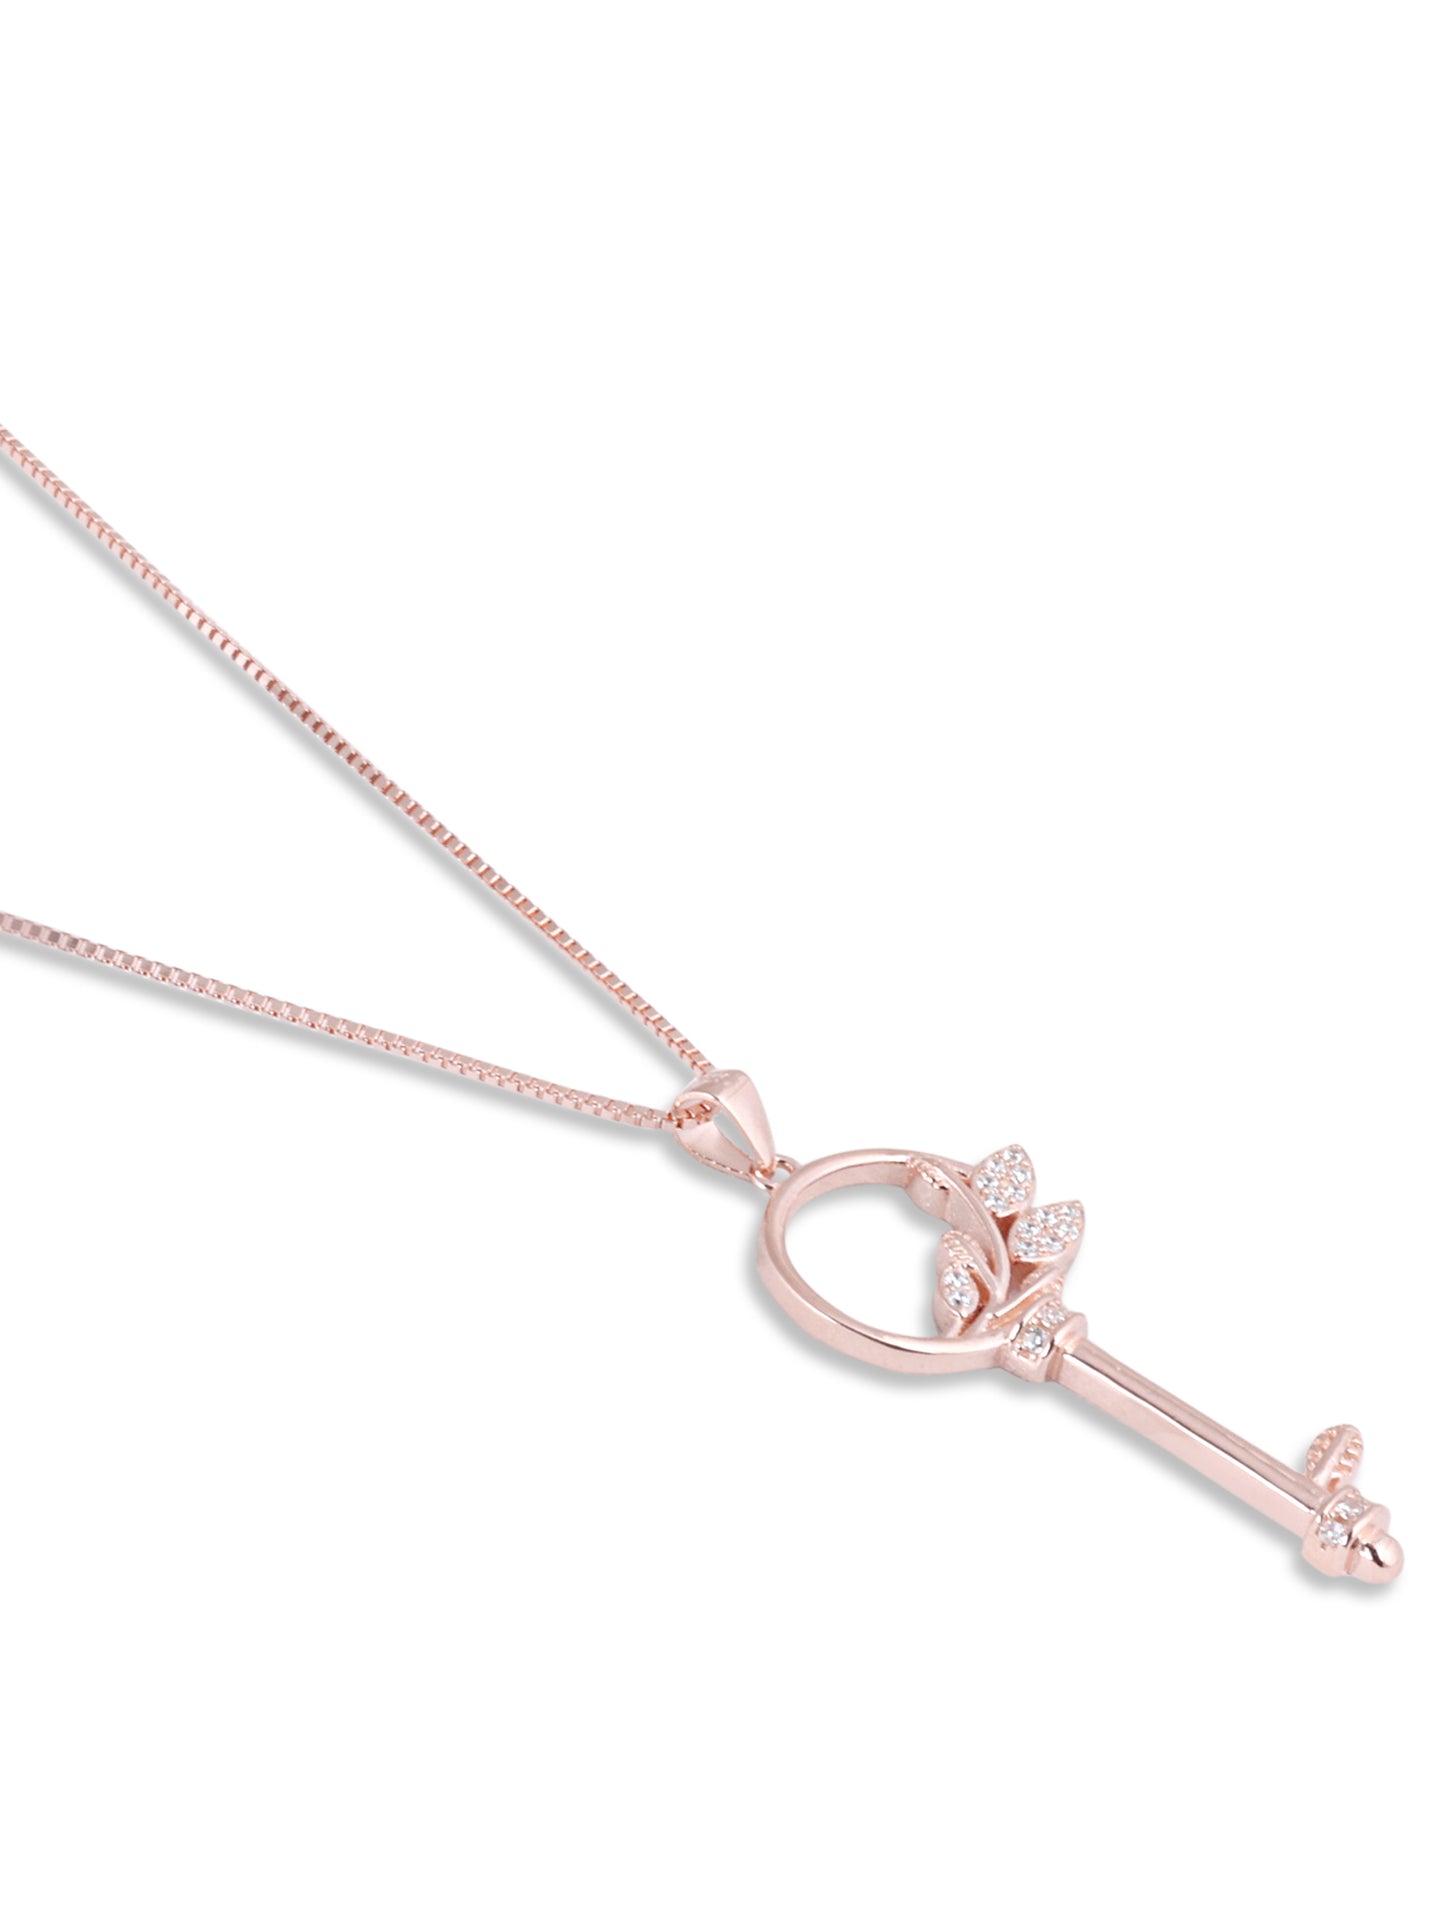 Crystal Garden Key Rose Gold Pendant with chain